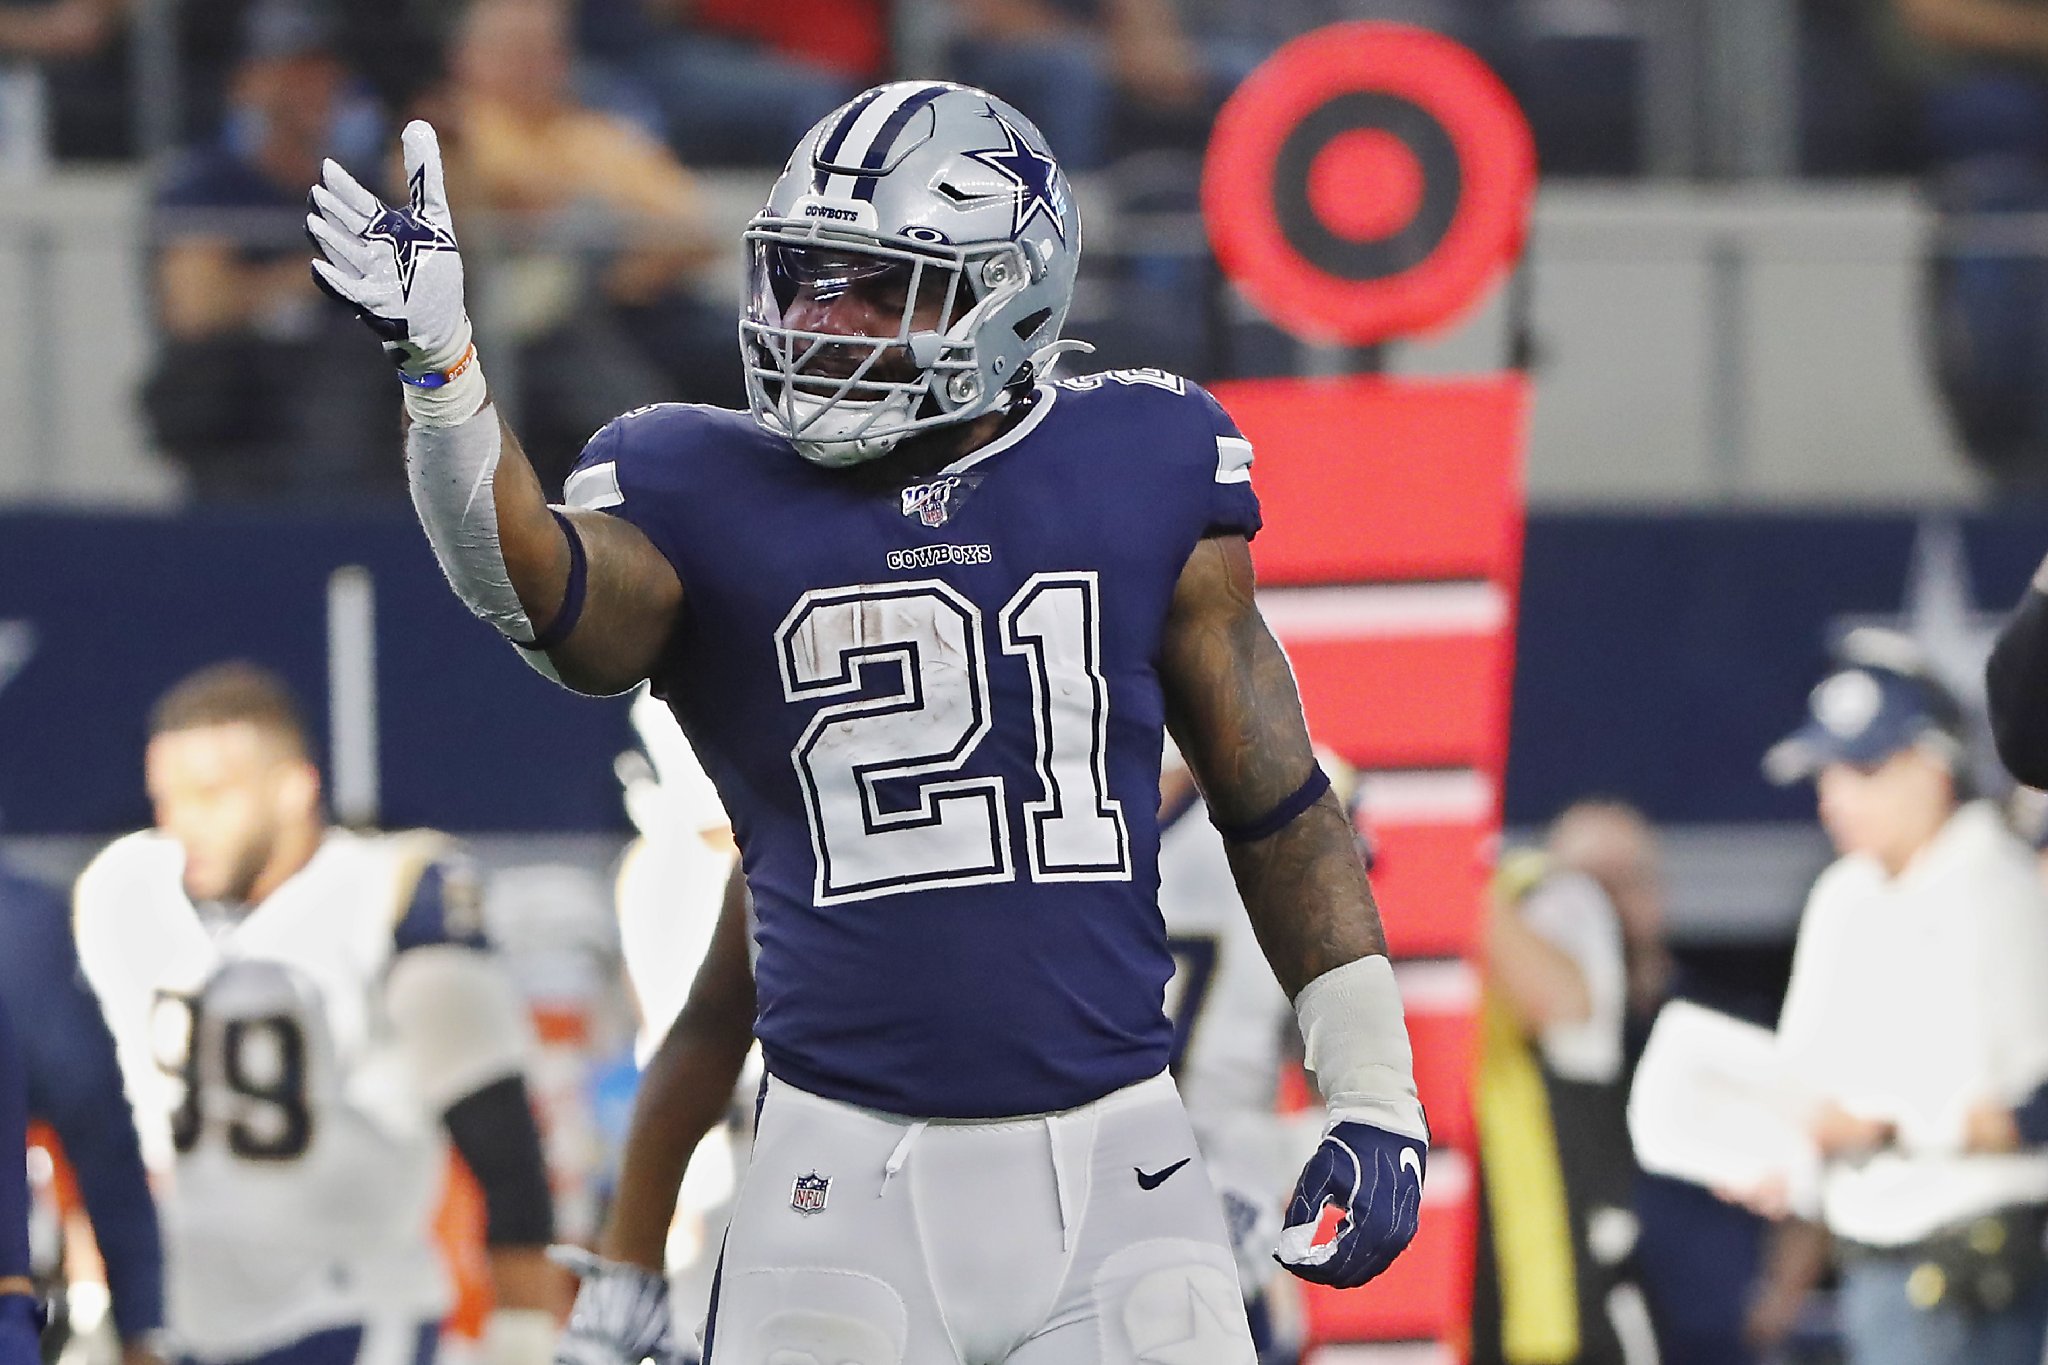 Reports: Cowboys' Elliott, Texans players test positive for COVID-19